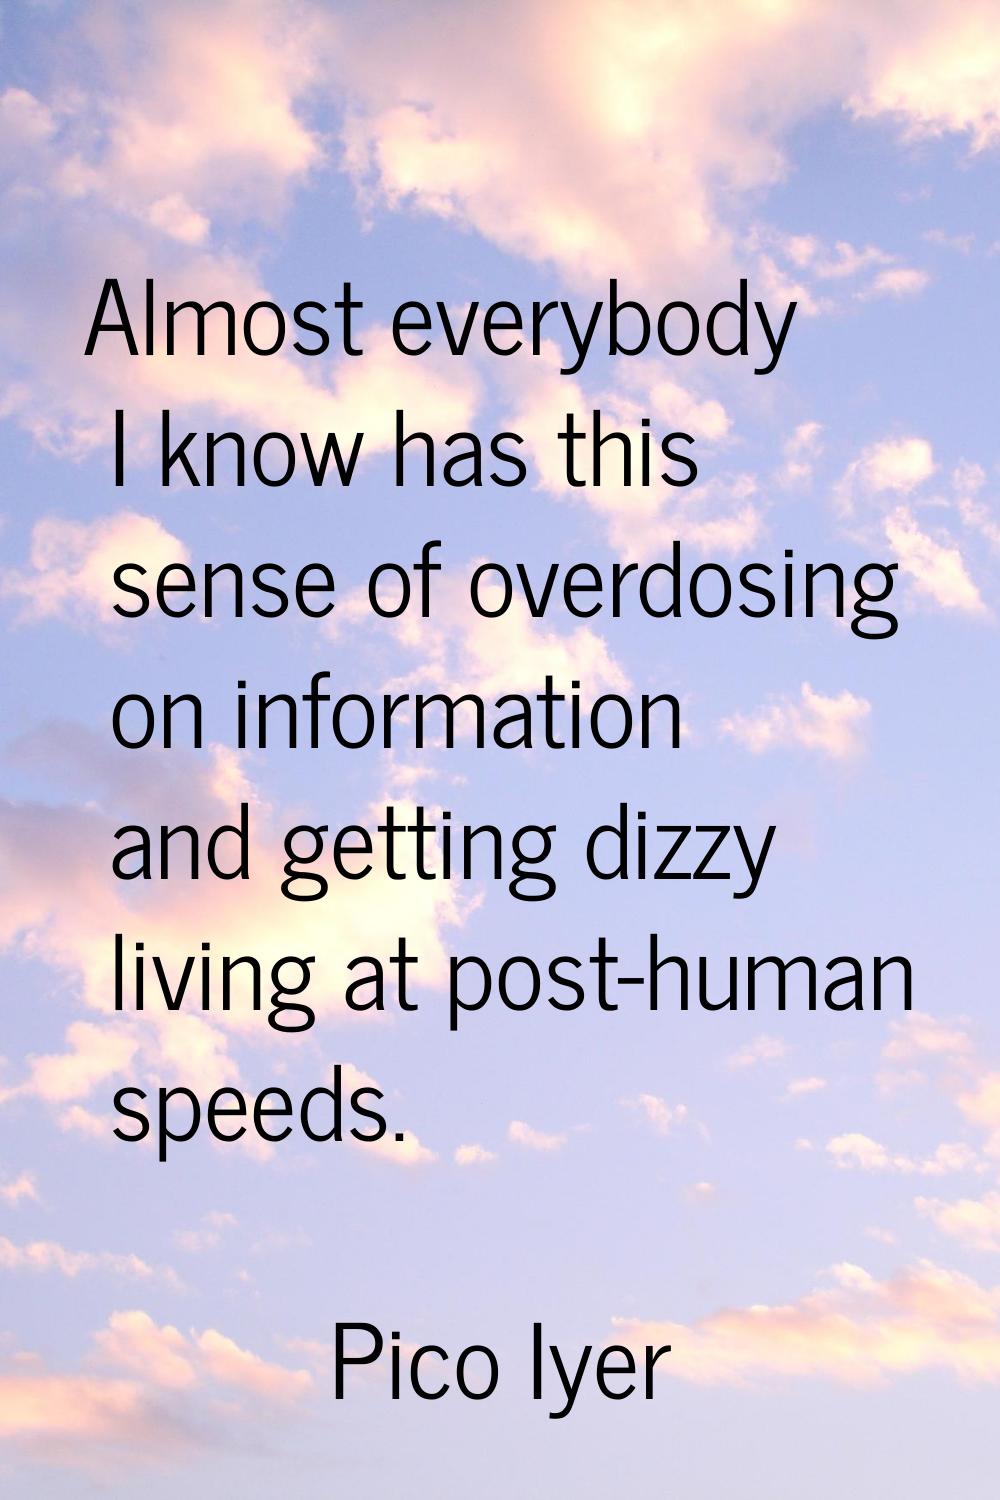 Almost everybody I know has this sense of overdosing on information and getting dizzy living at pos